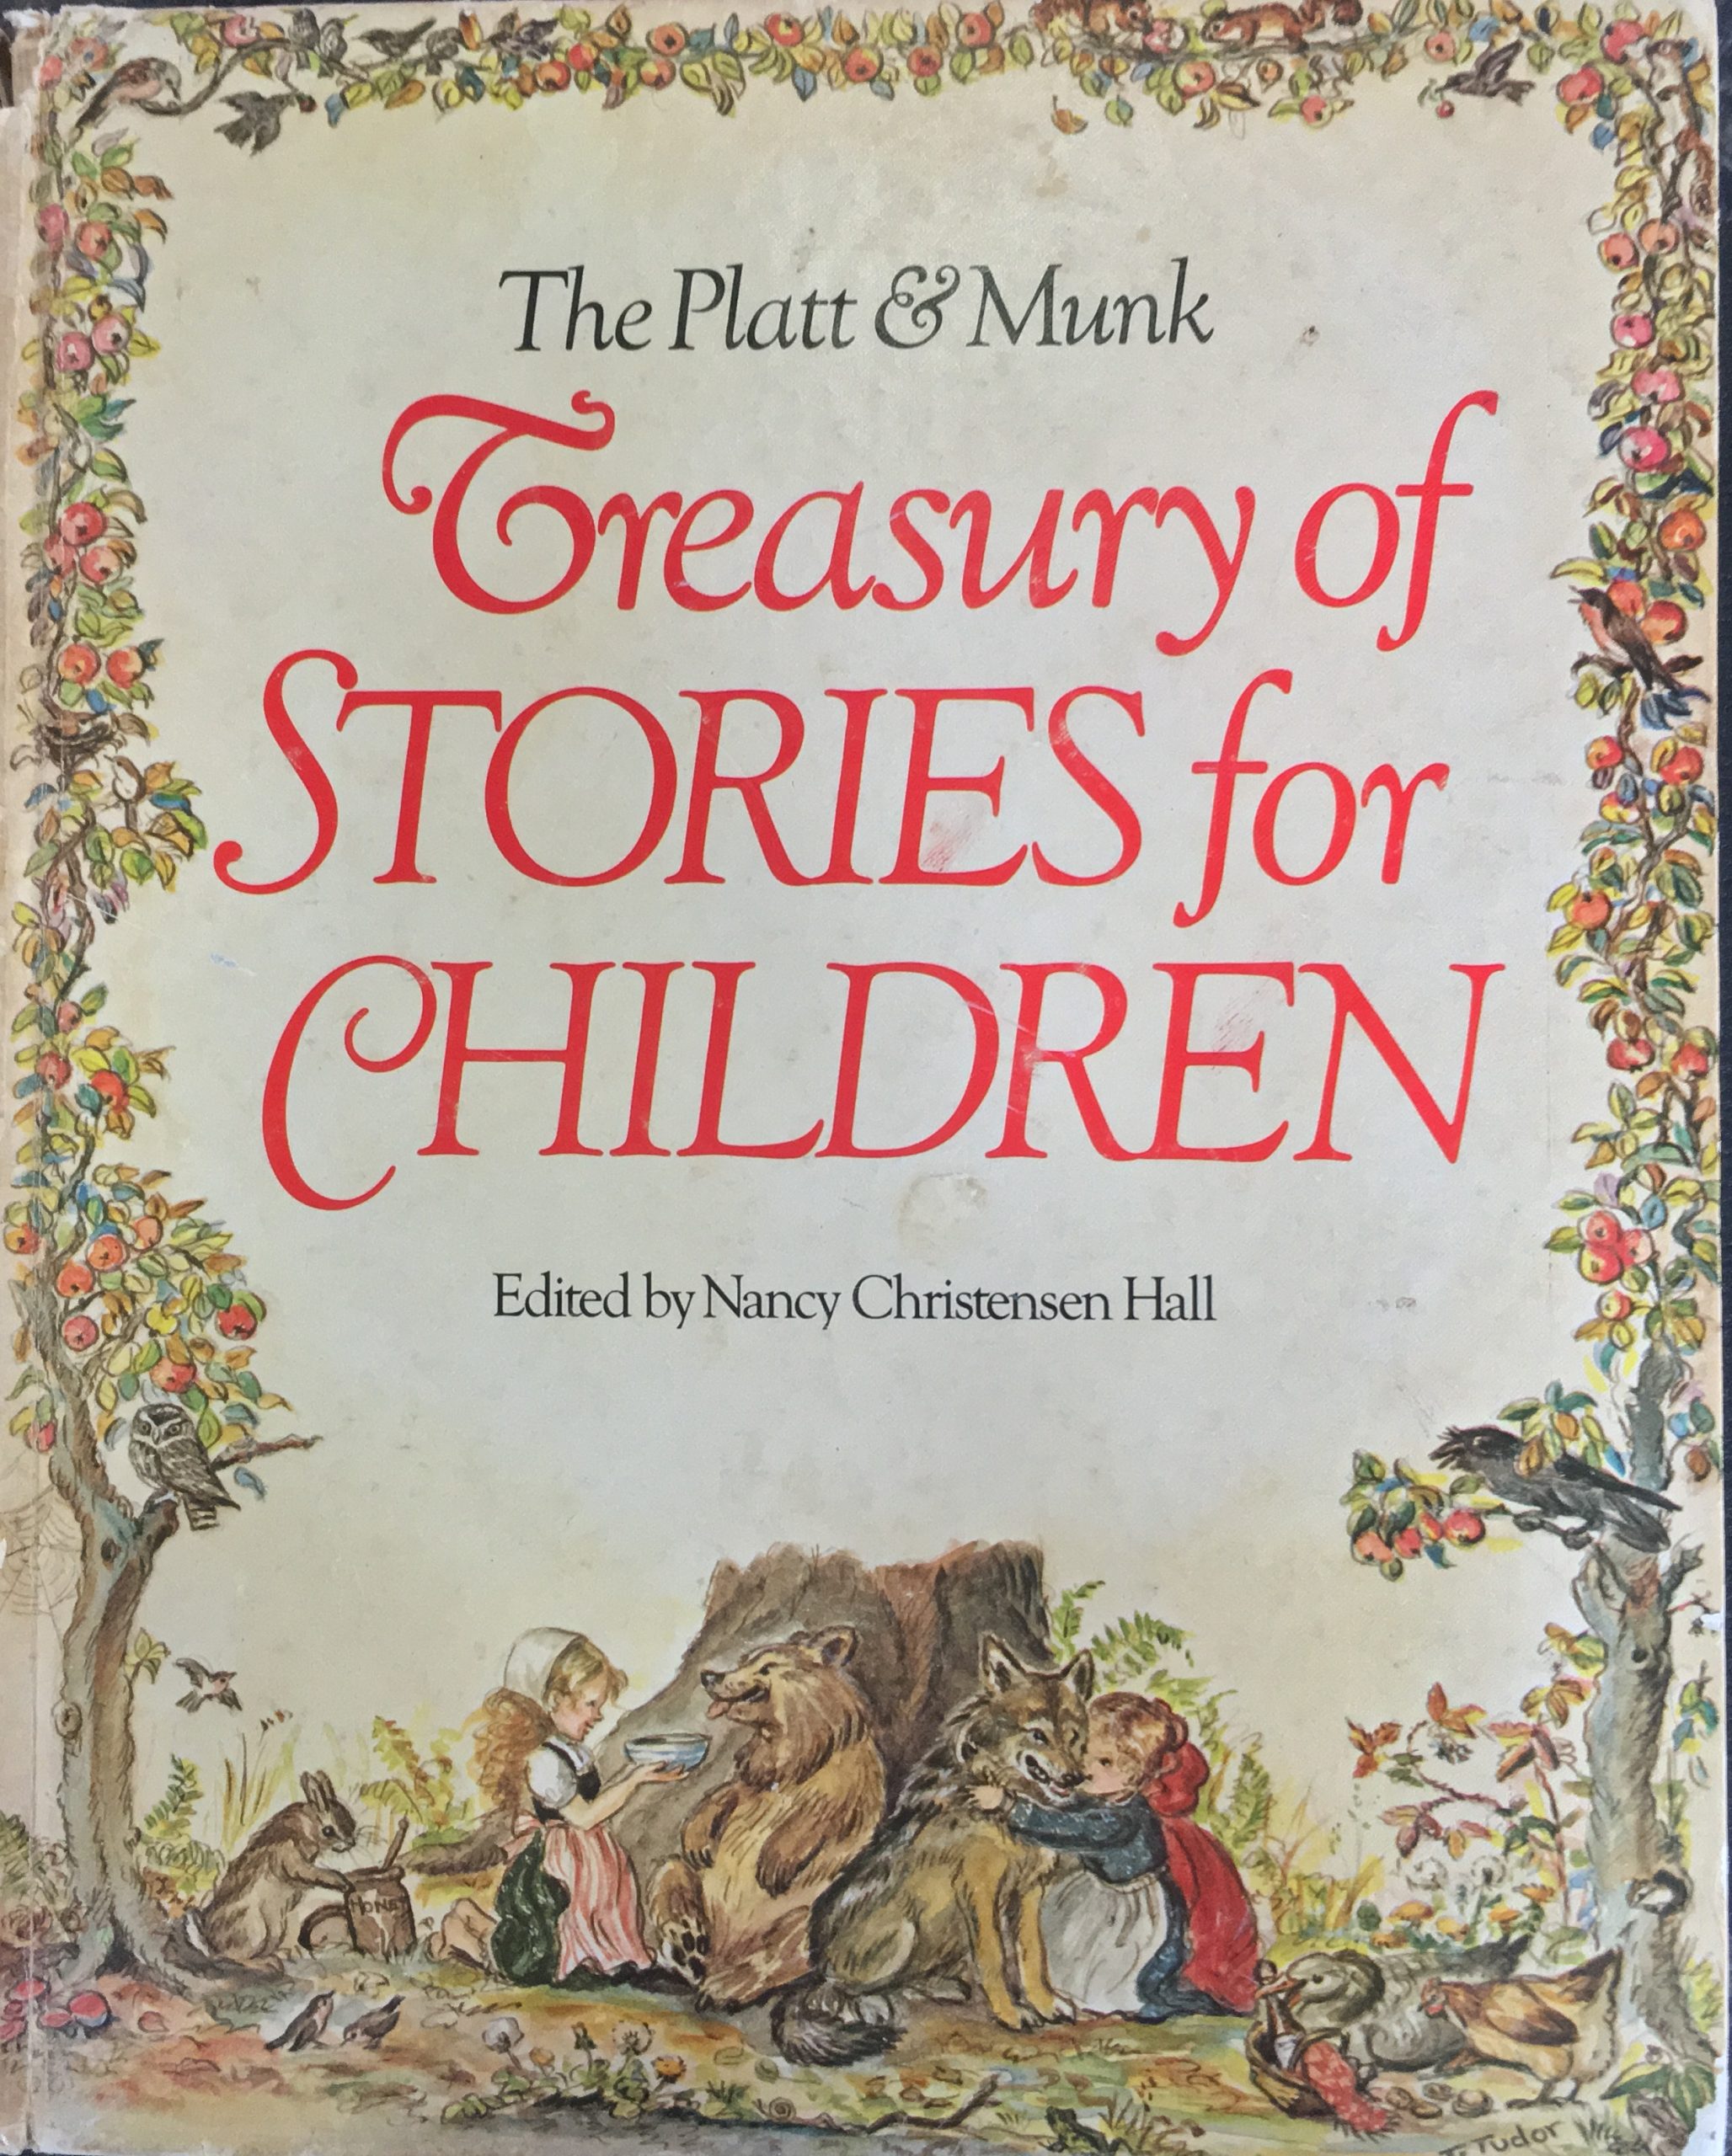 Cover of the "Treasury of Stories for Children"